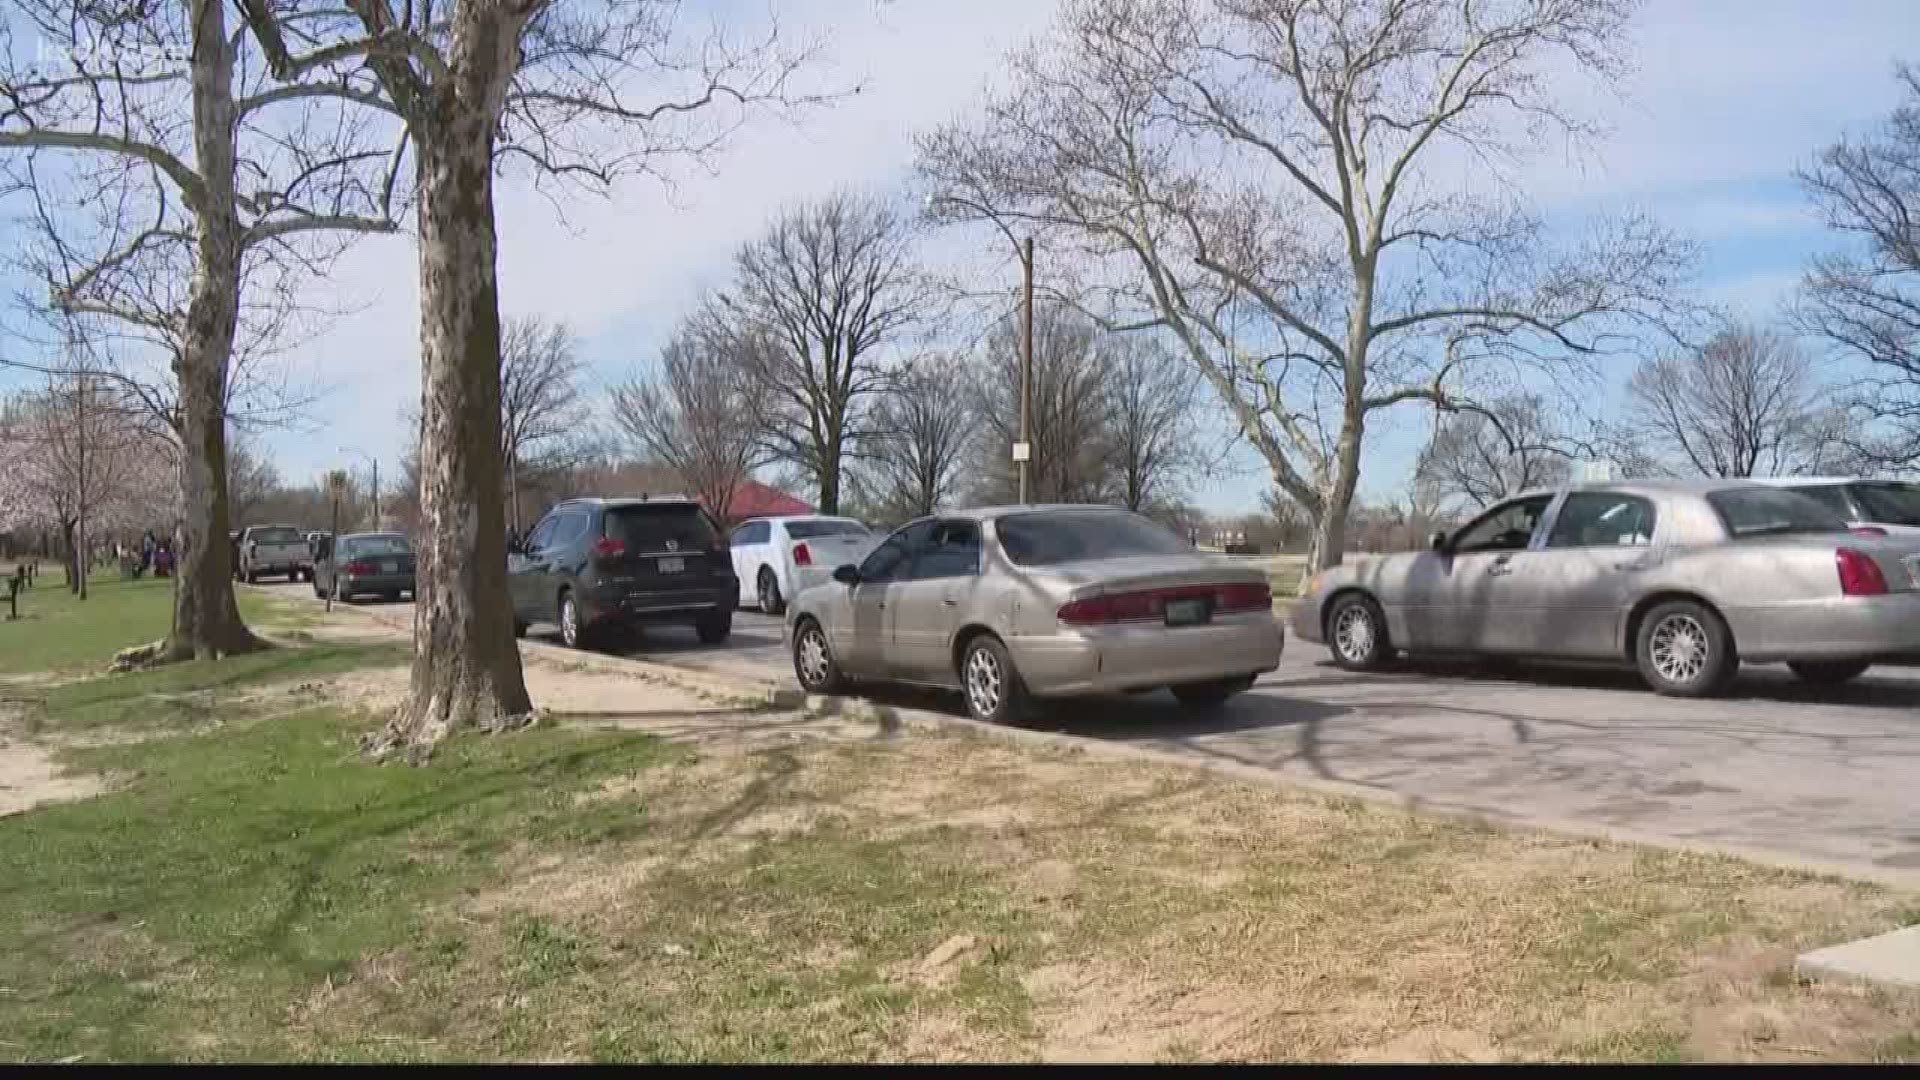 Social media posts show hundreds of cars lining the street in O'Fallon Park, people standing side by side. Another immediate concern: reports of guns and gunfire.